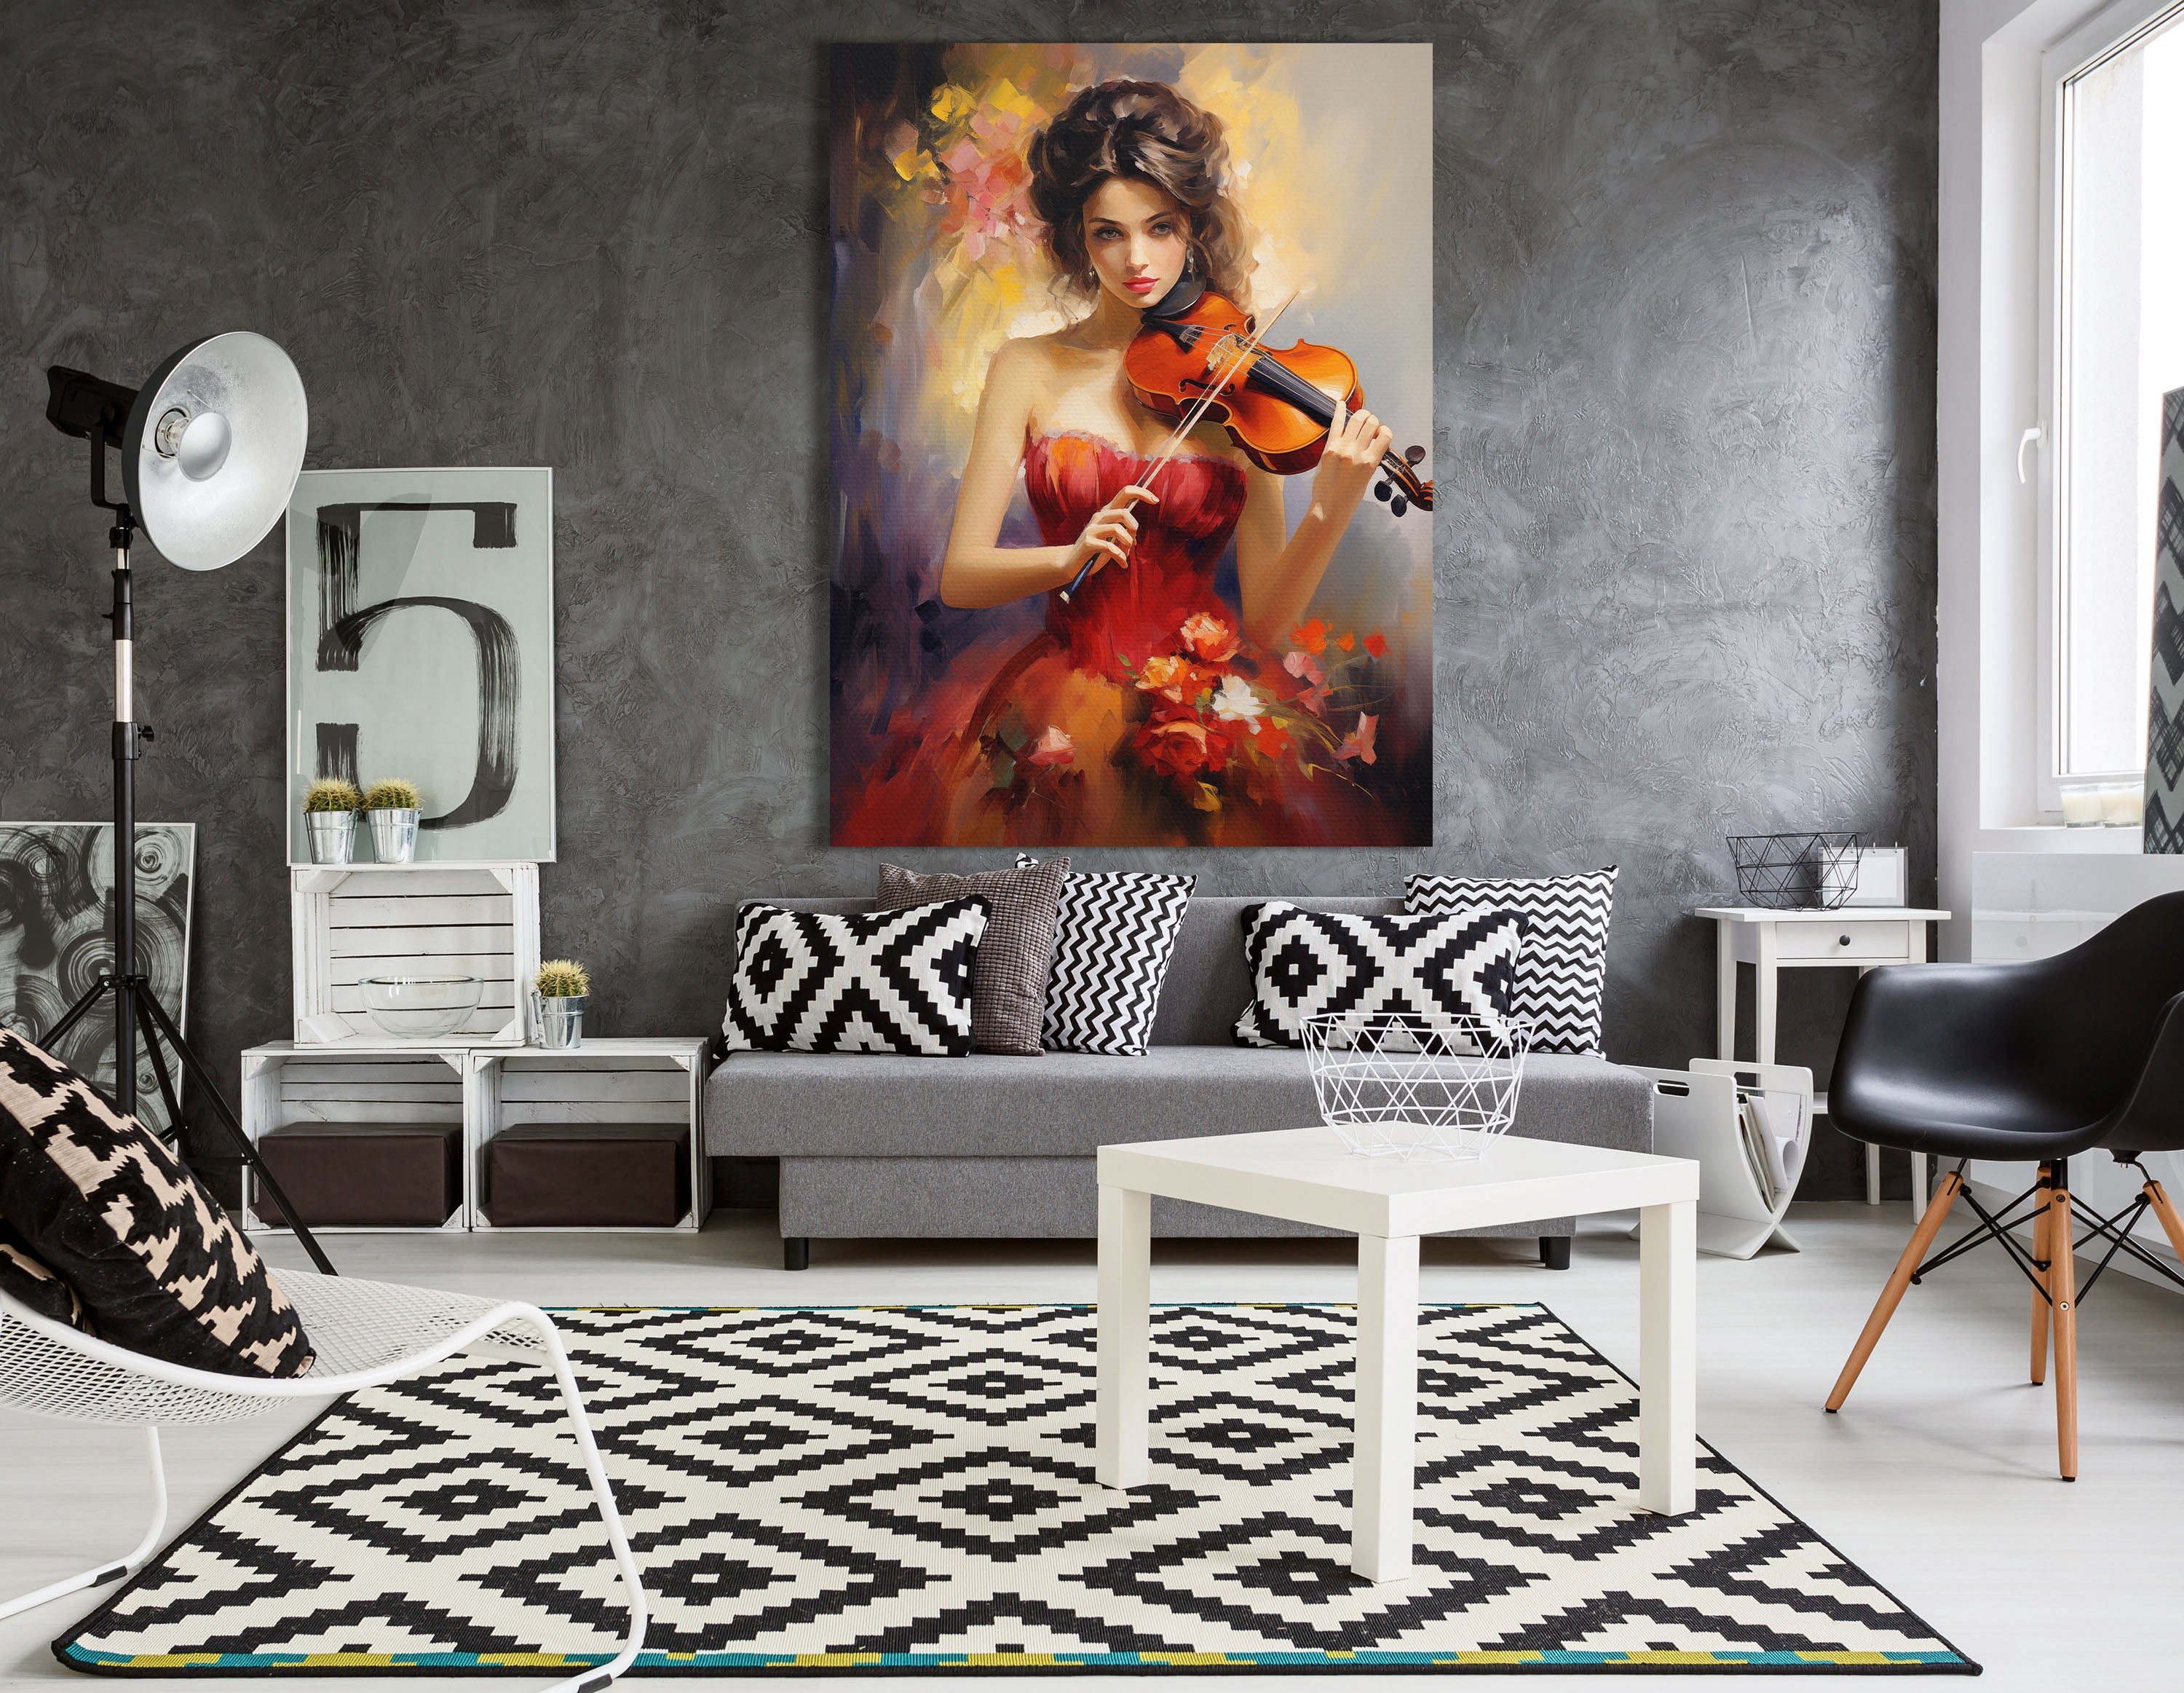 Musician in Red Wall Decor